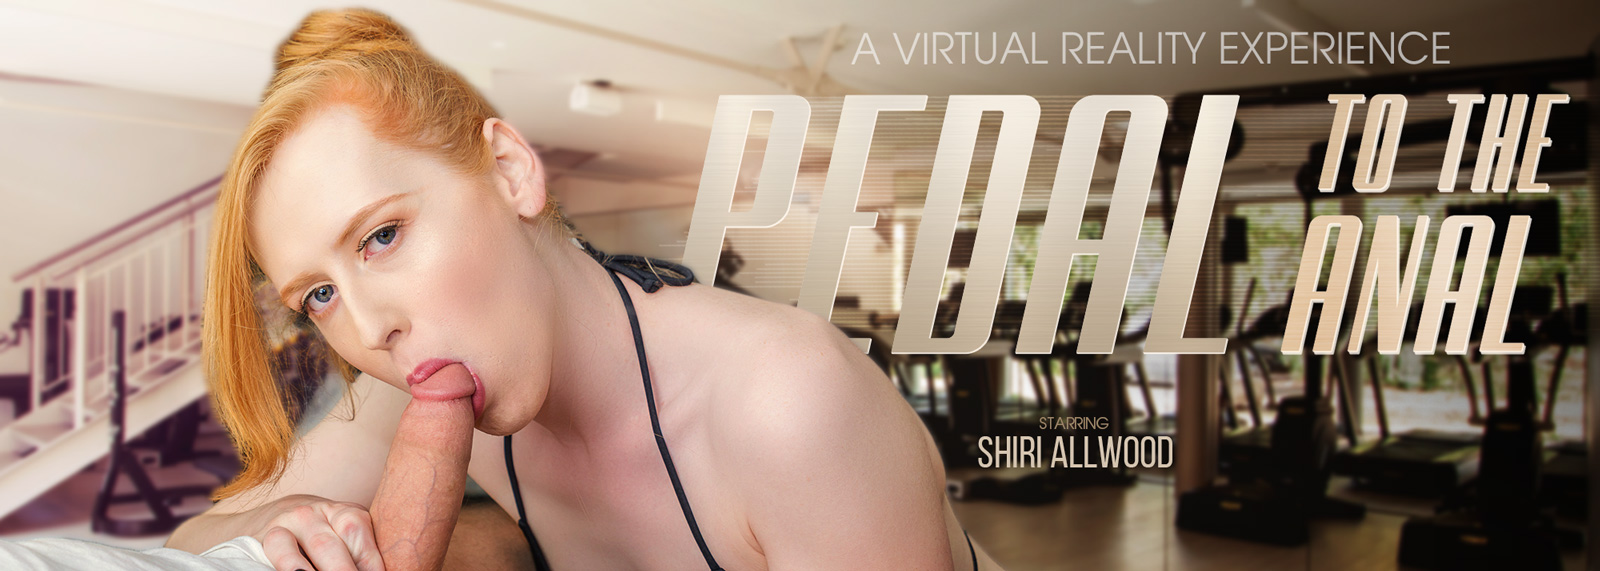 Pedal to the Anal - VR Porn Video, Starring: Shiri Allwood VR